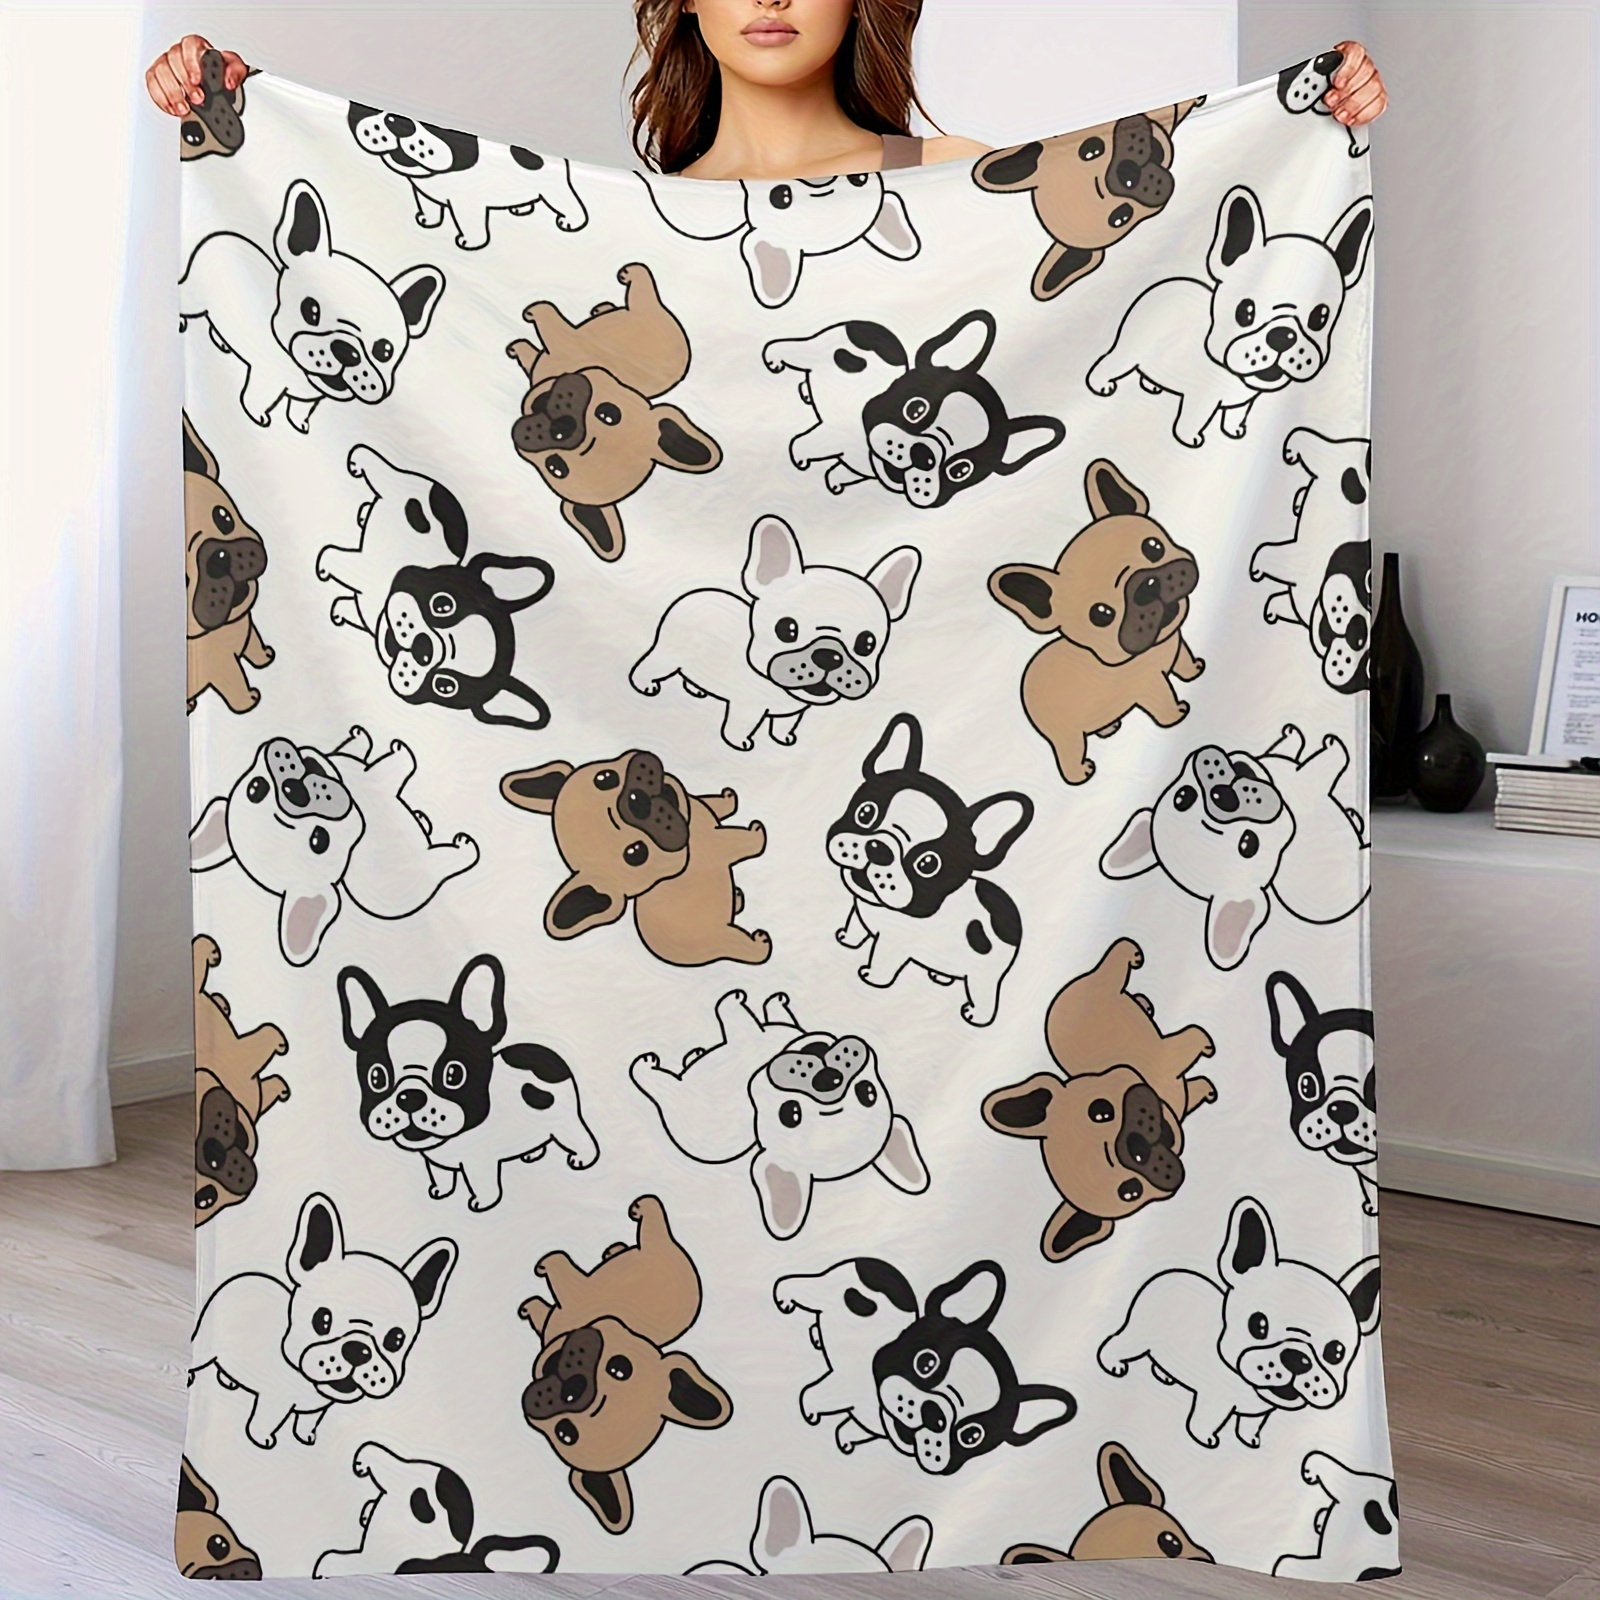 

chic Design" Cozy French Bulldog Flannel Throw Blanket - Soft, Warm & Tear-resistant For Couch, Bed, Office, And Travel - All-season Gift Idea